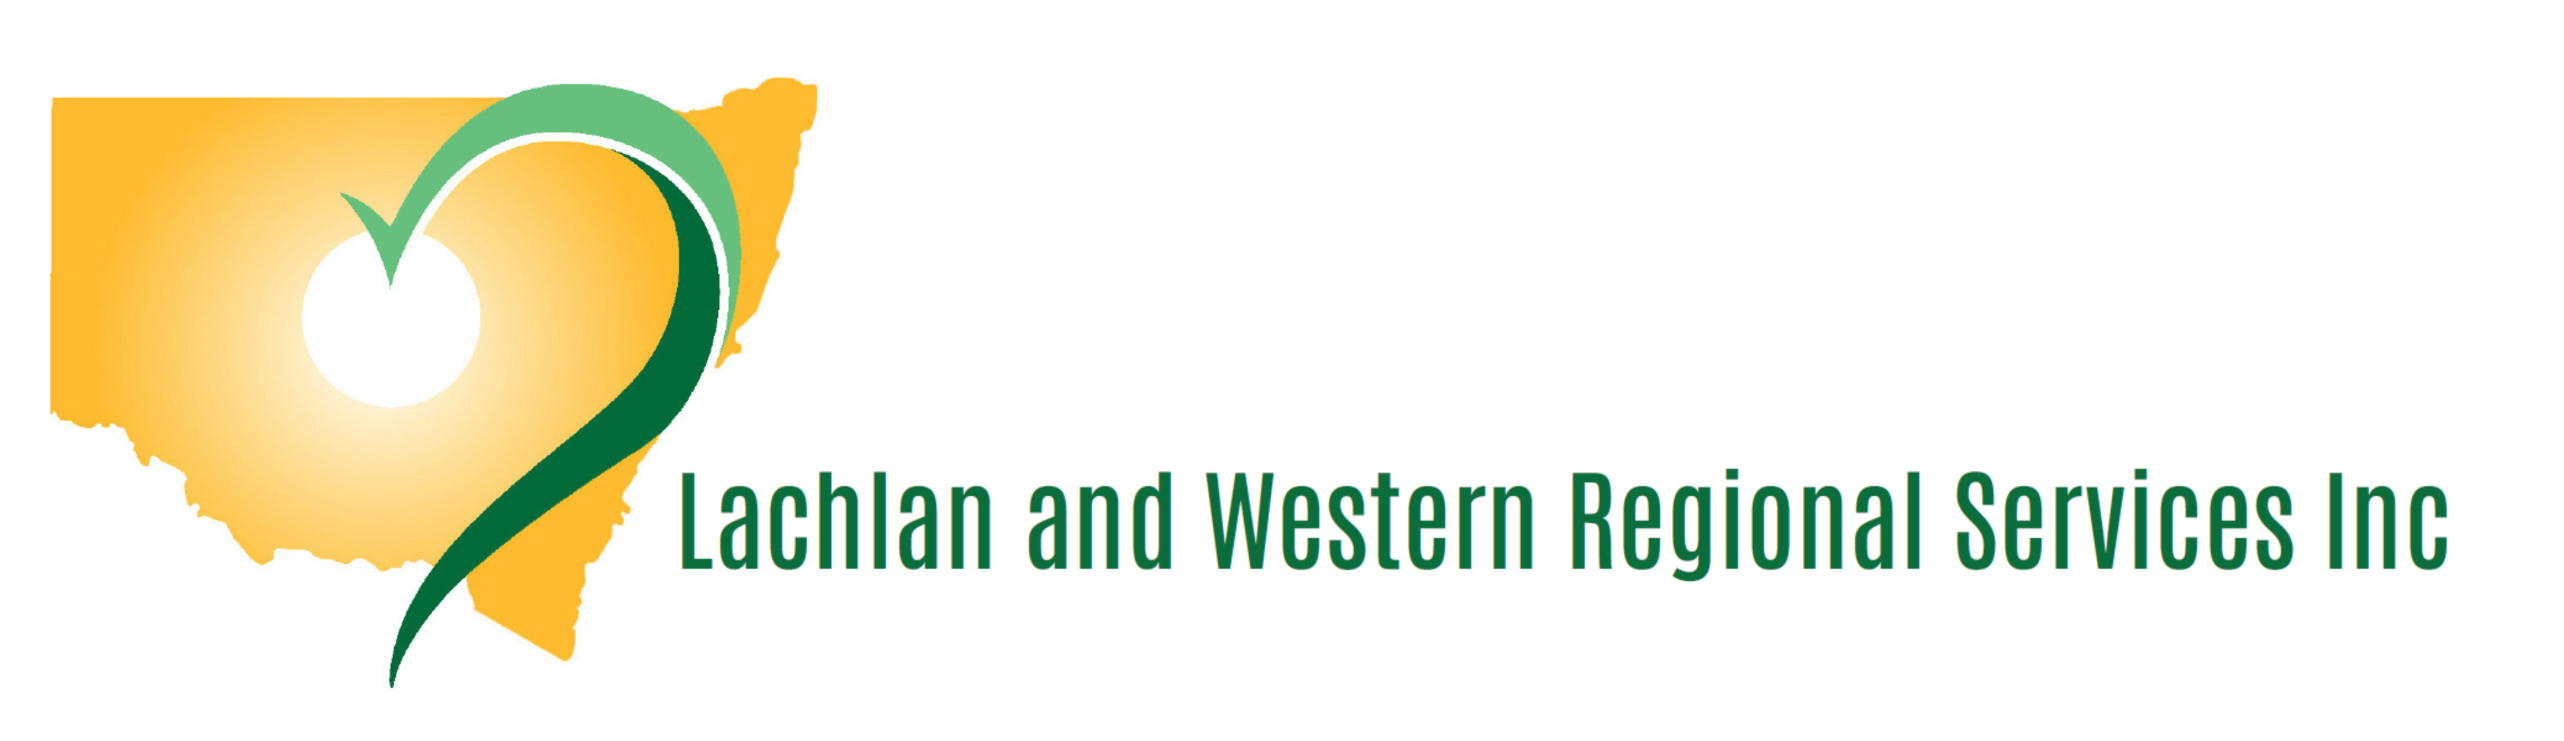 Lachlan and Western Regional Services Inc Logo